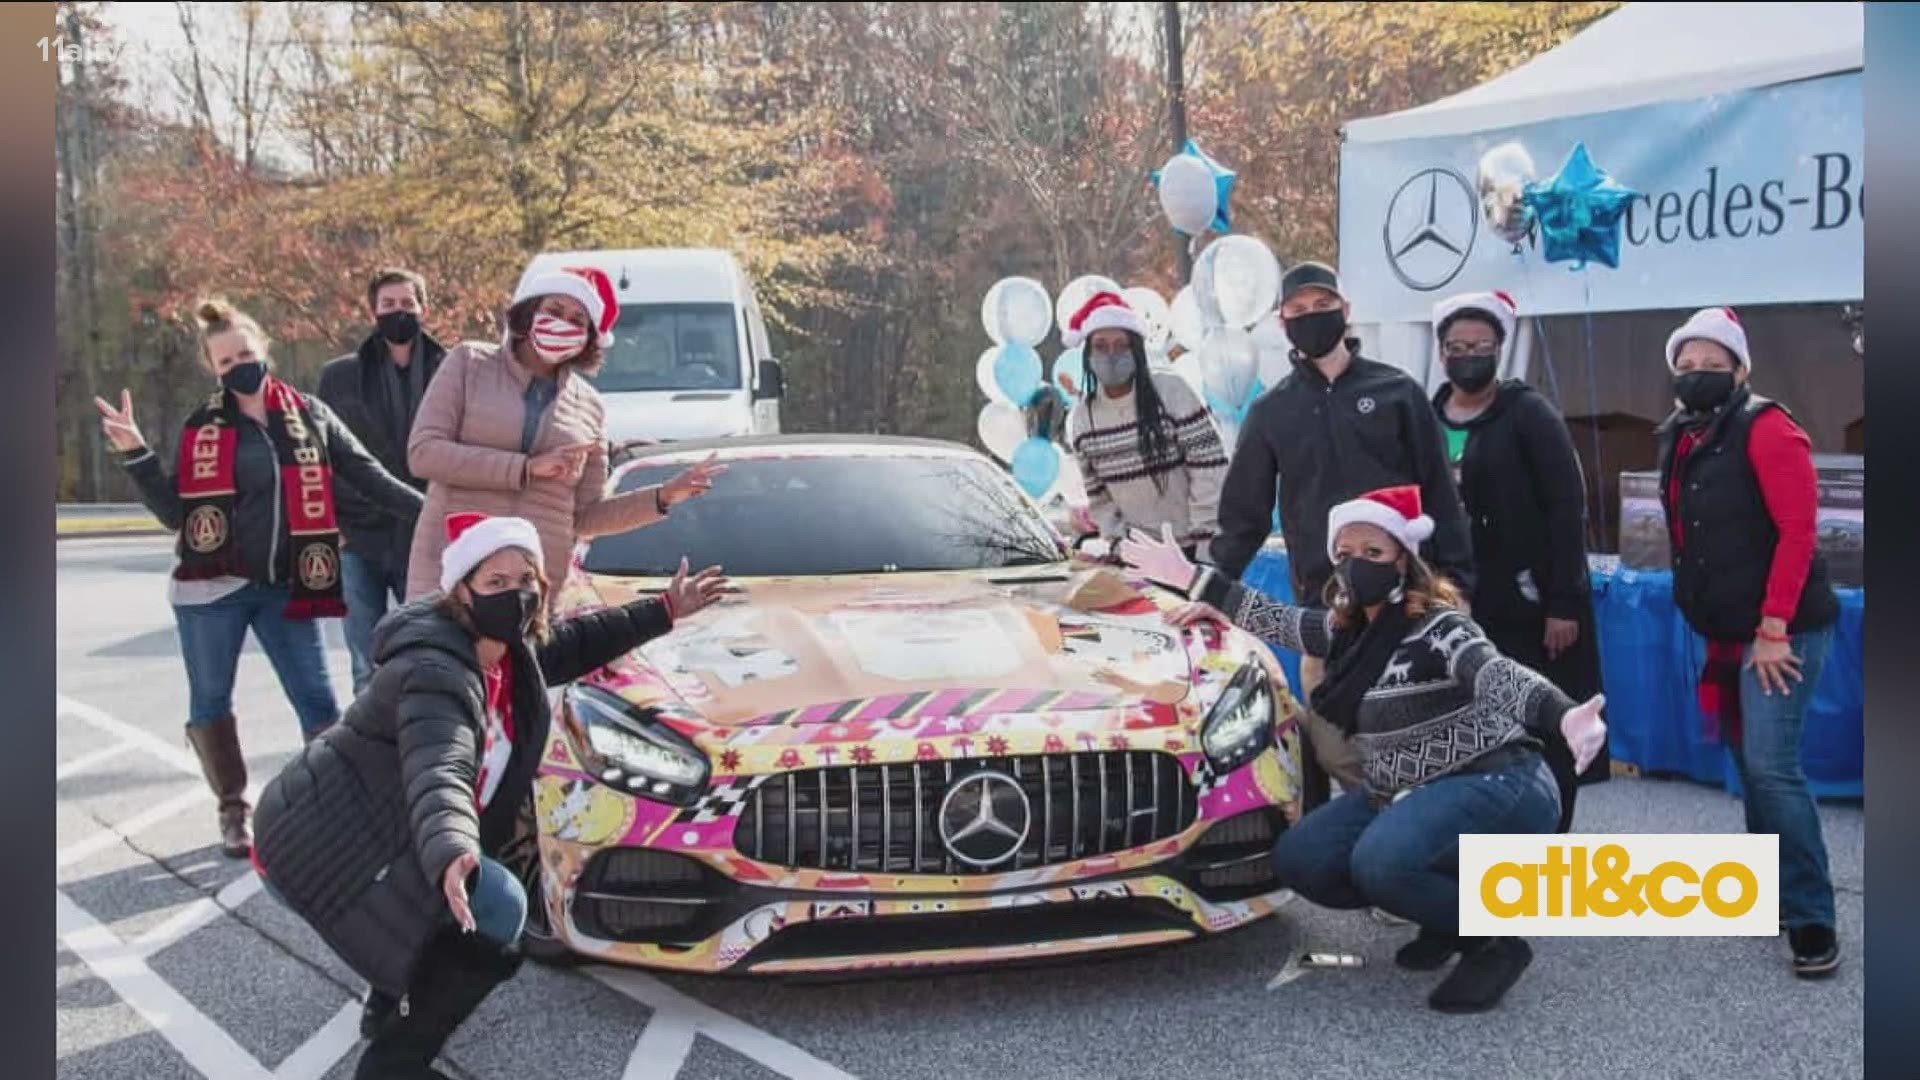 Mercedes-Benz is involved in several initiatives empowering our local neighborhoods, focused on education, environment, and community assistance.